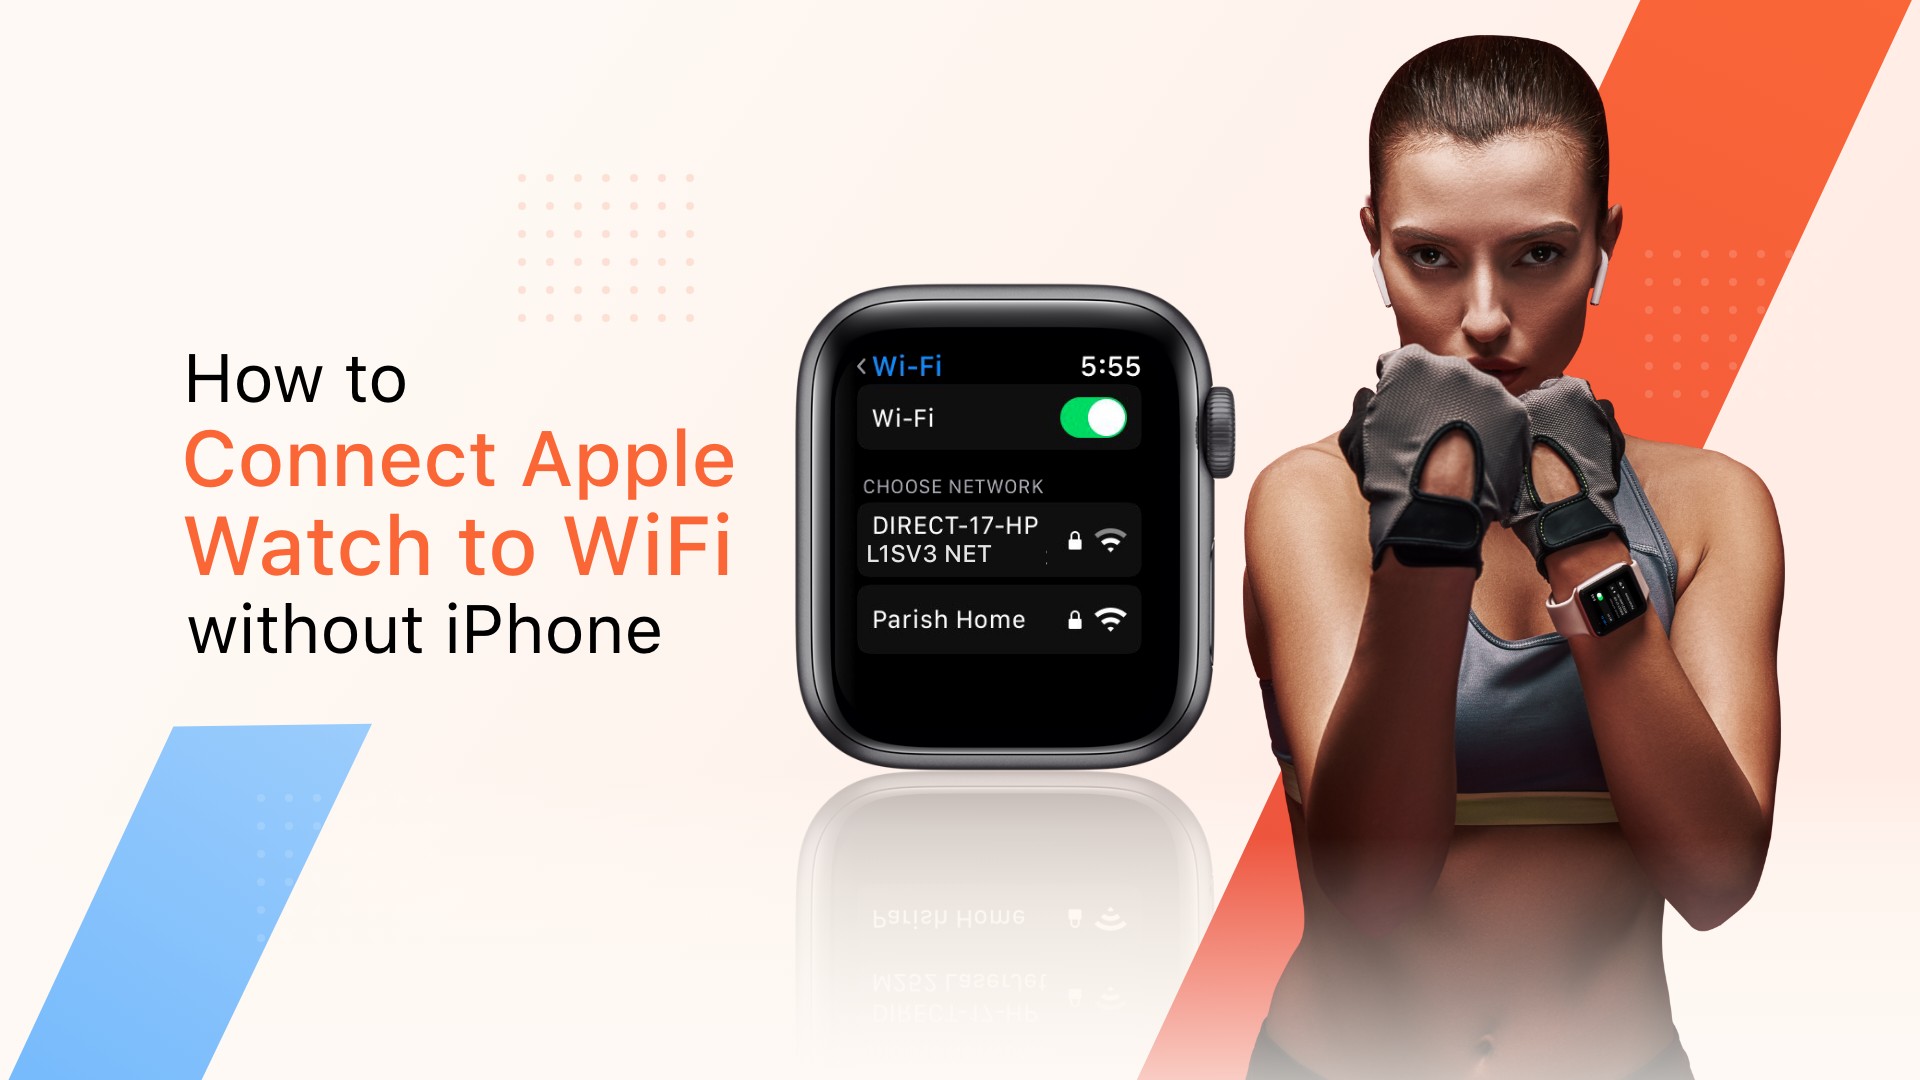 how to connect apple watch to wifi without iPhone